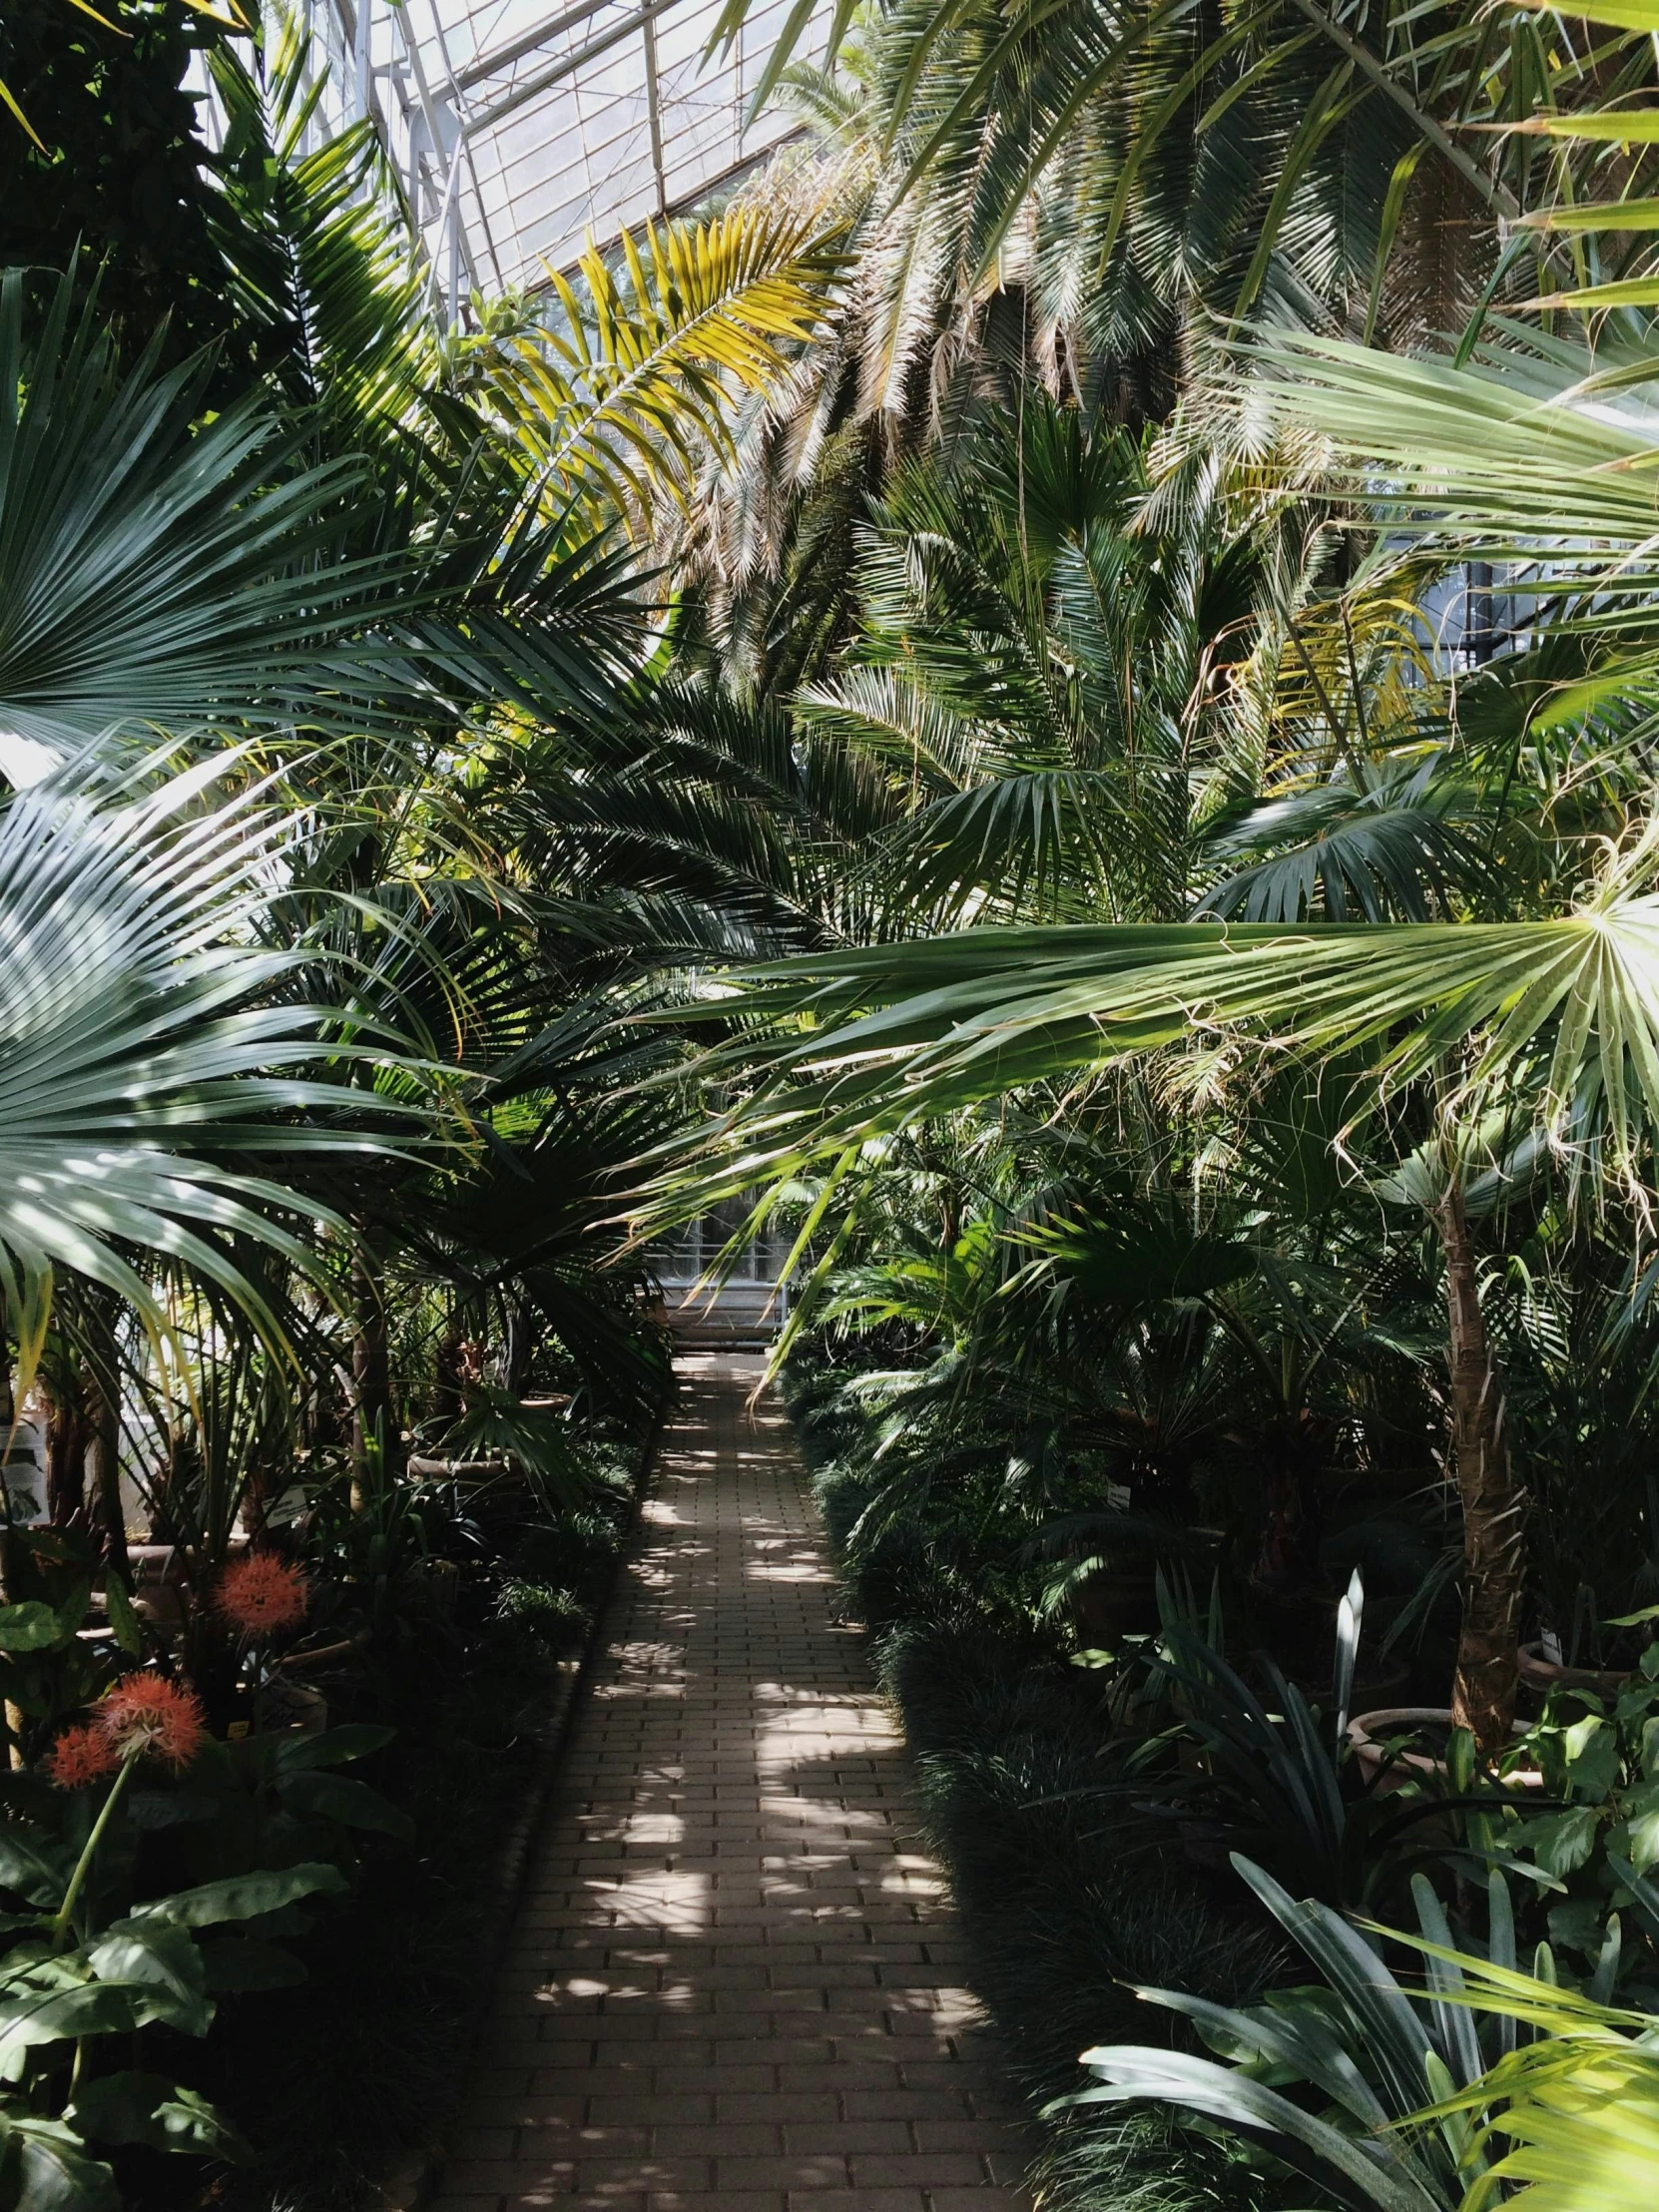 the walkway is lined with tropical plants and trees